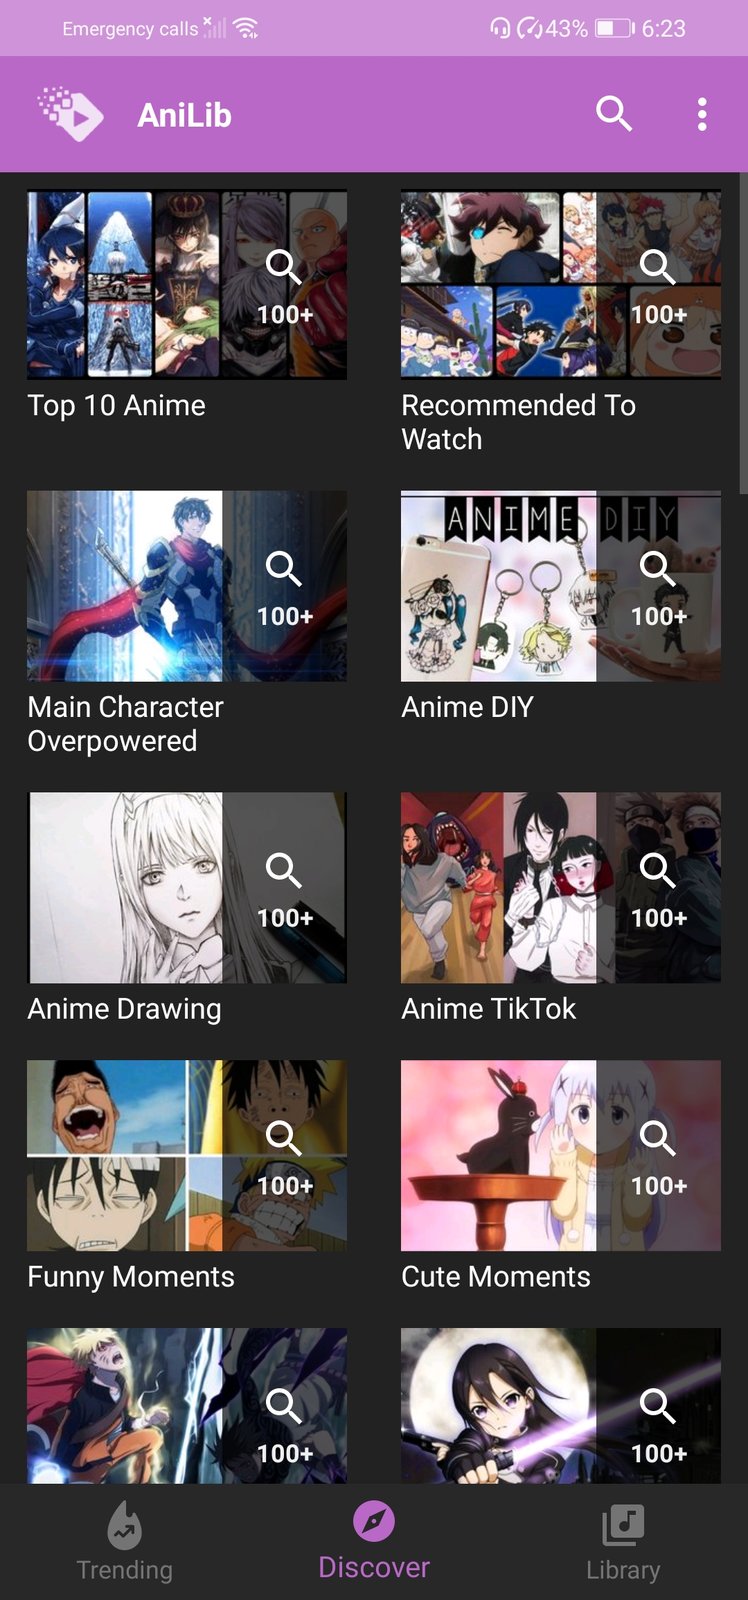 Download Anime tv - Anime Tv Online HD MOD APK v6.0 for Android